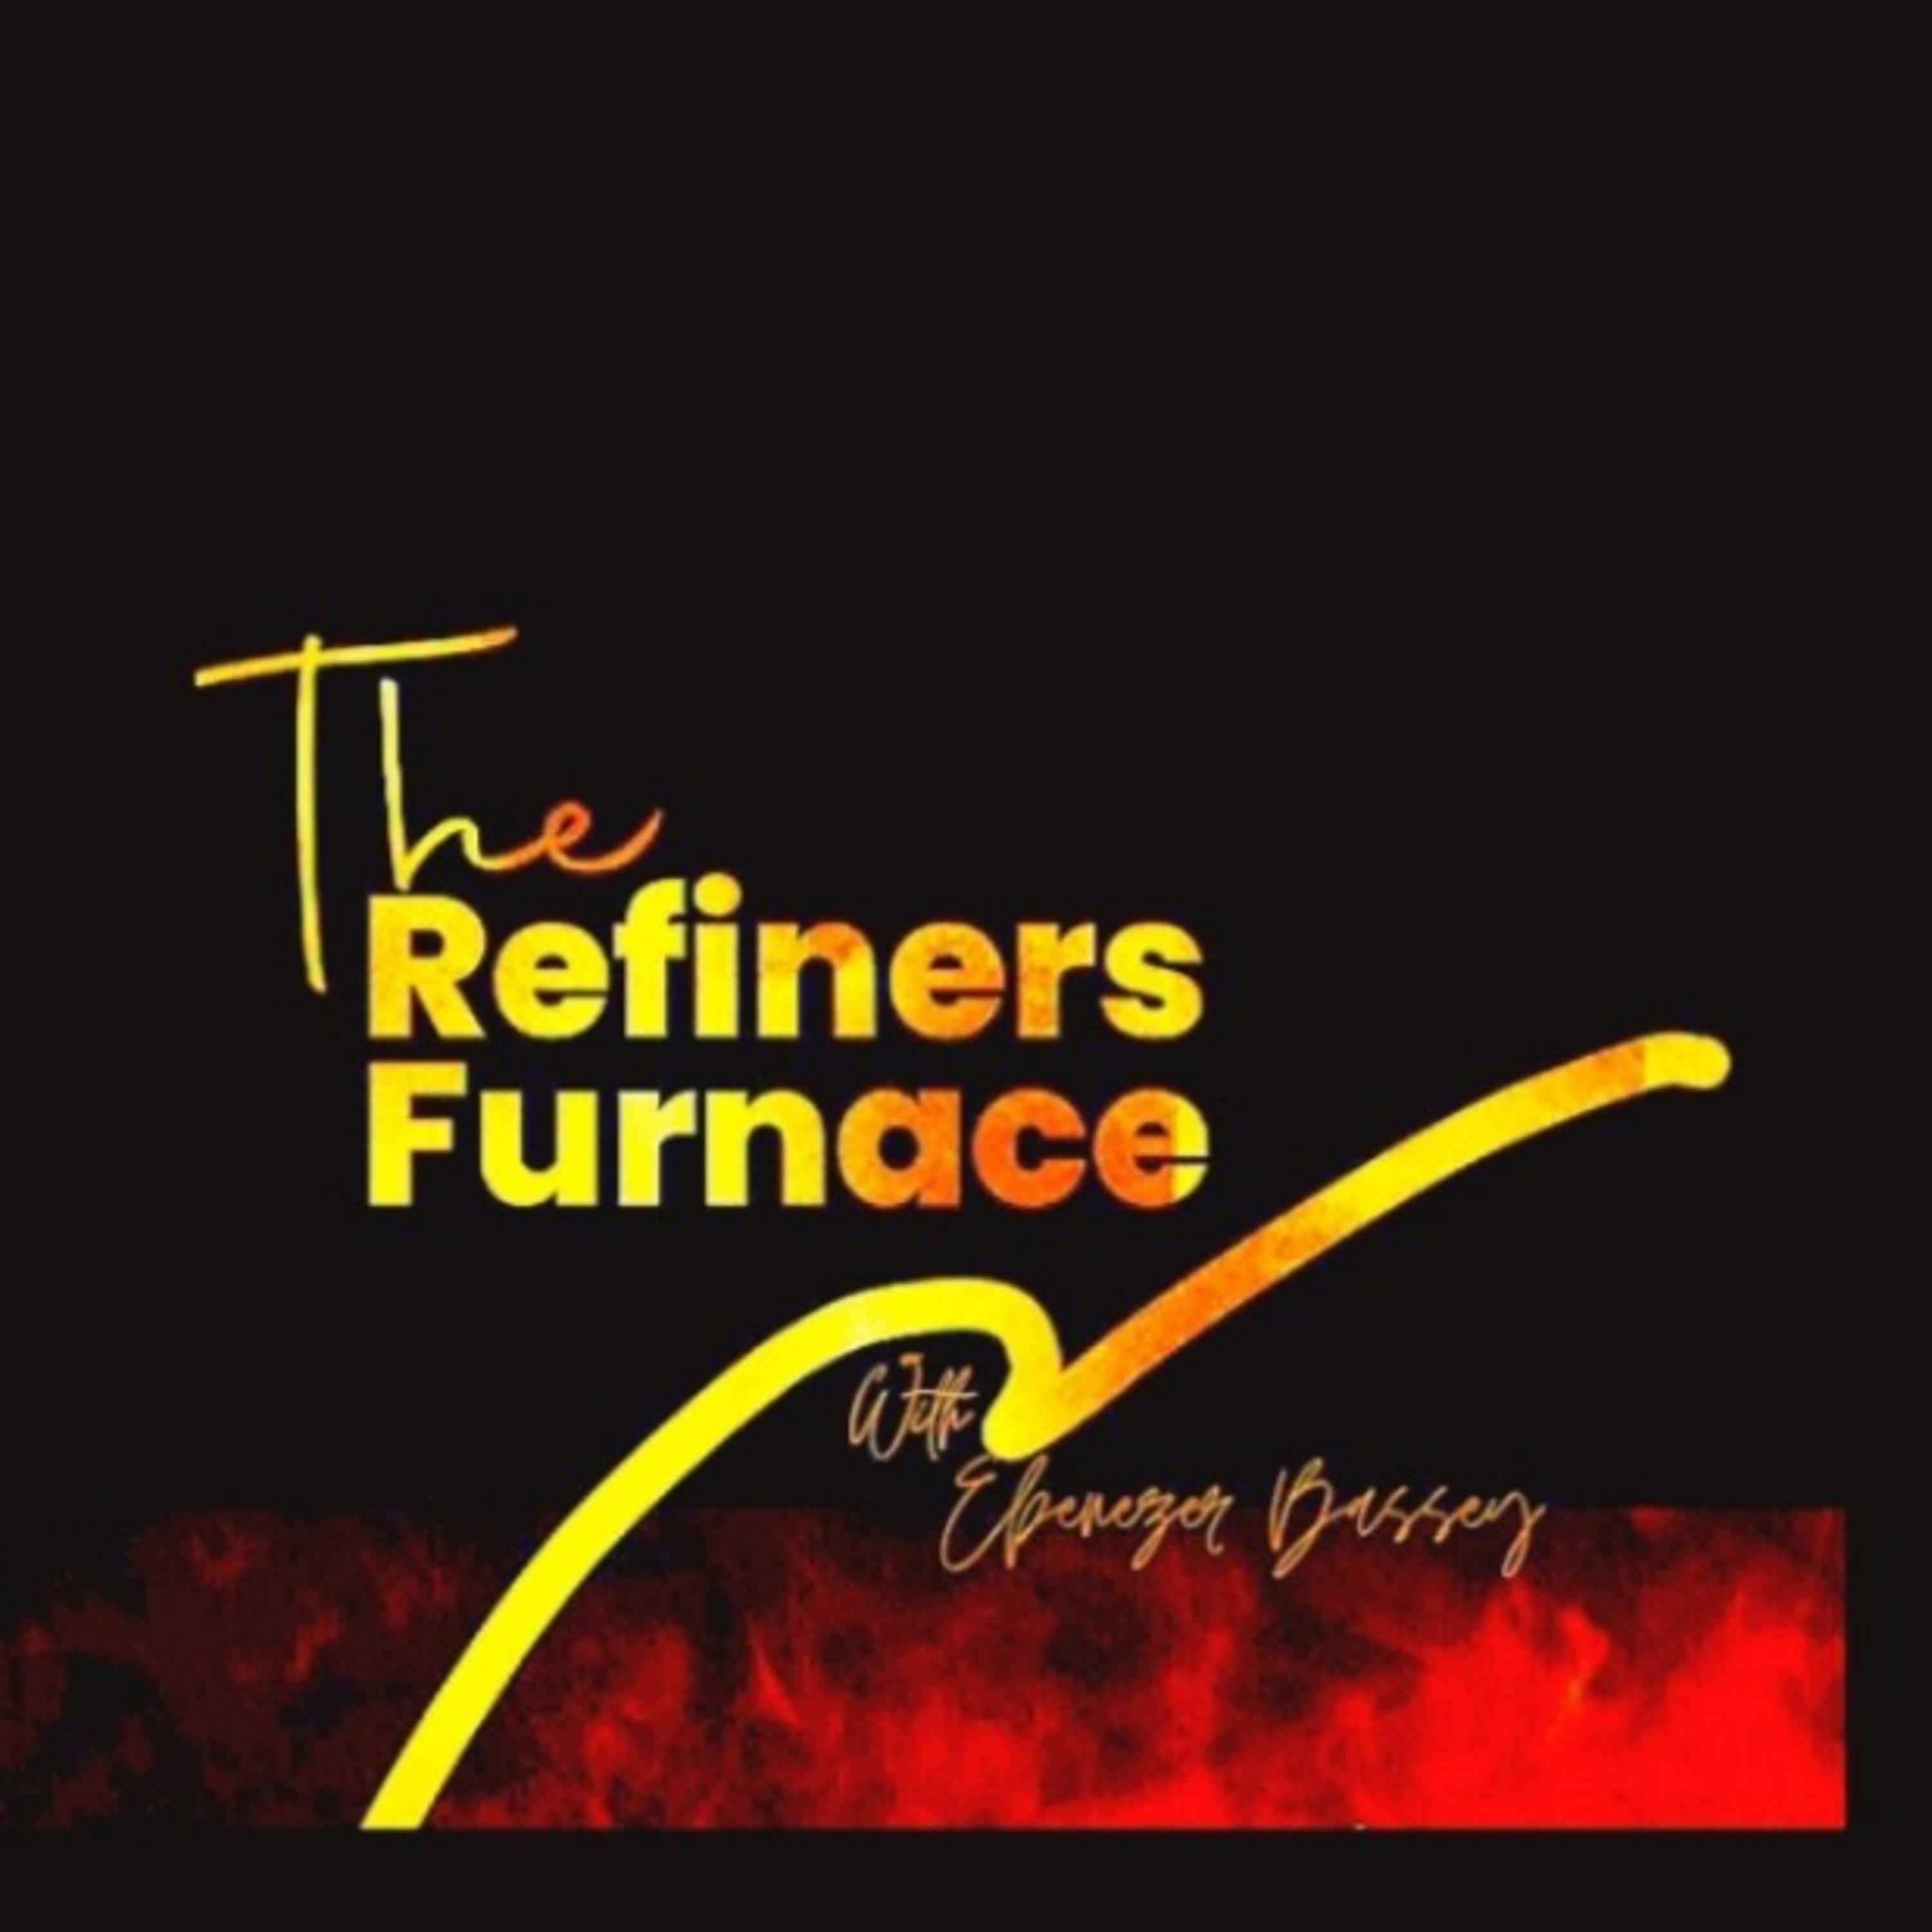 The Refiners Furnace